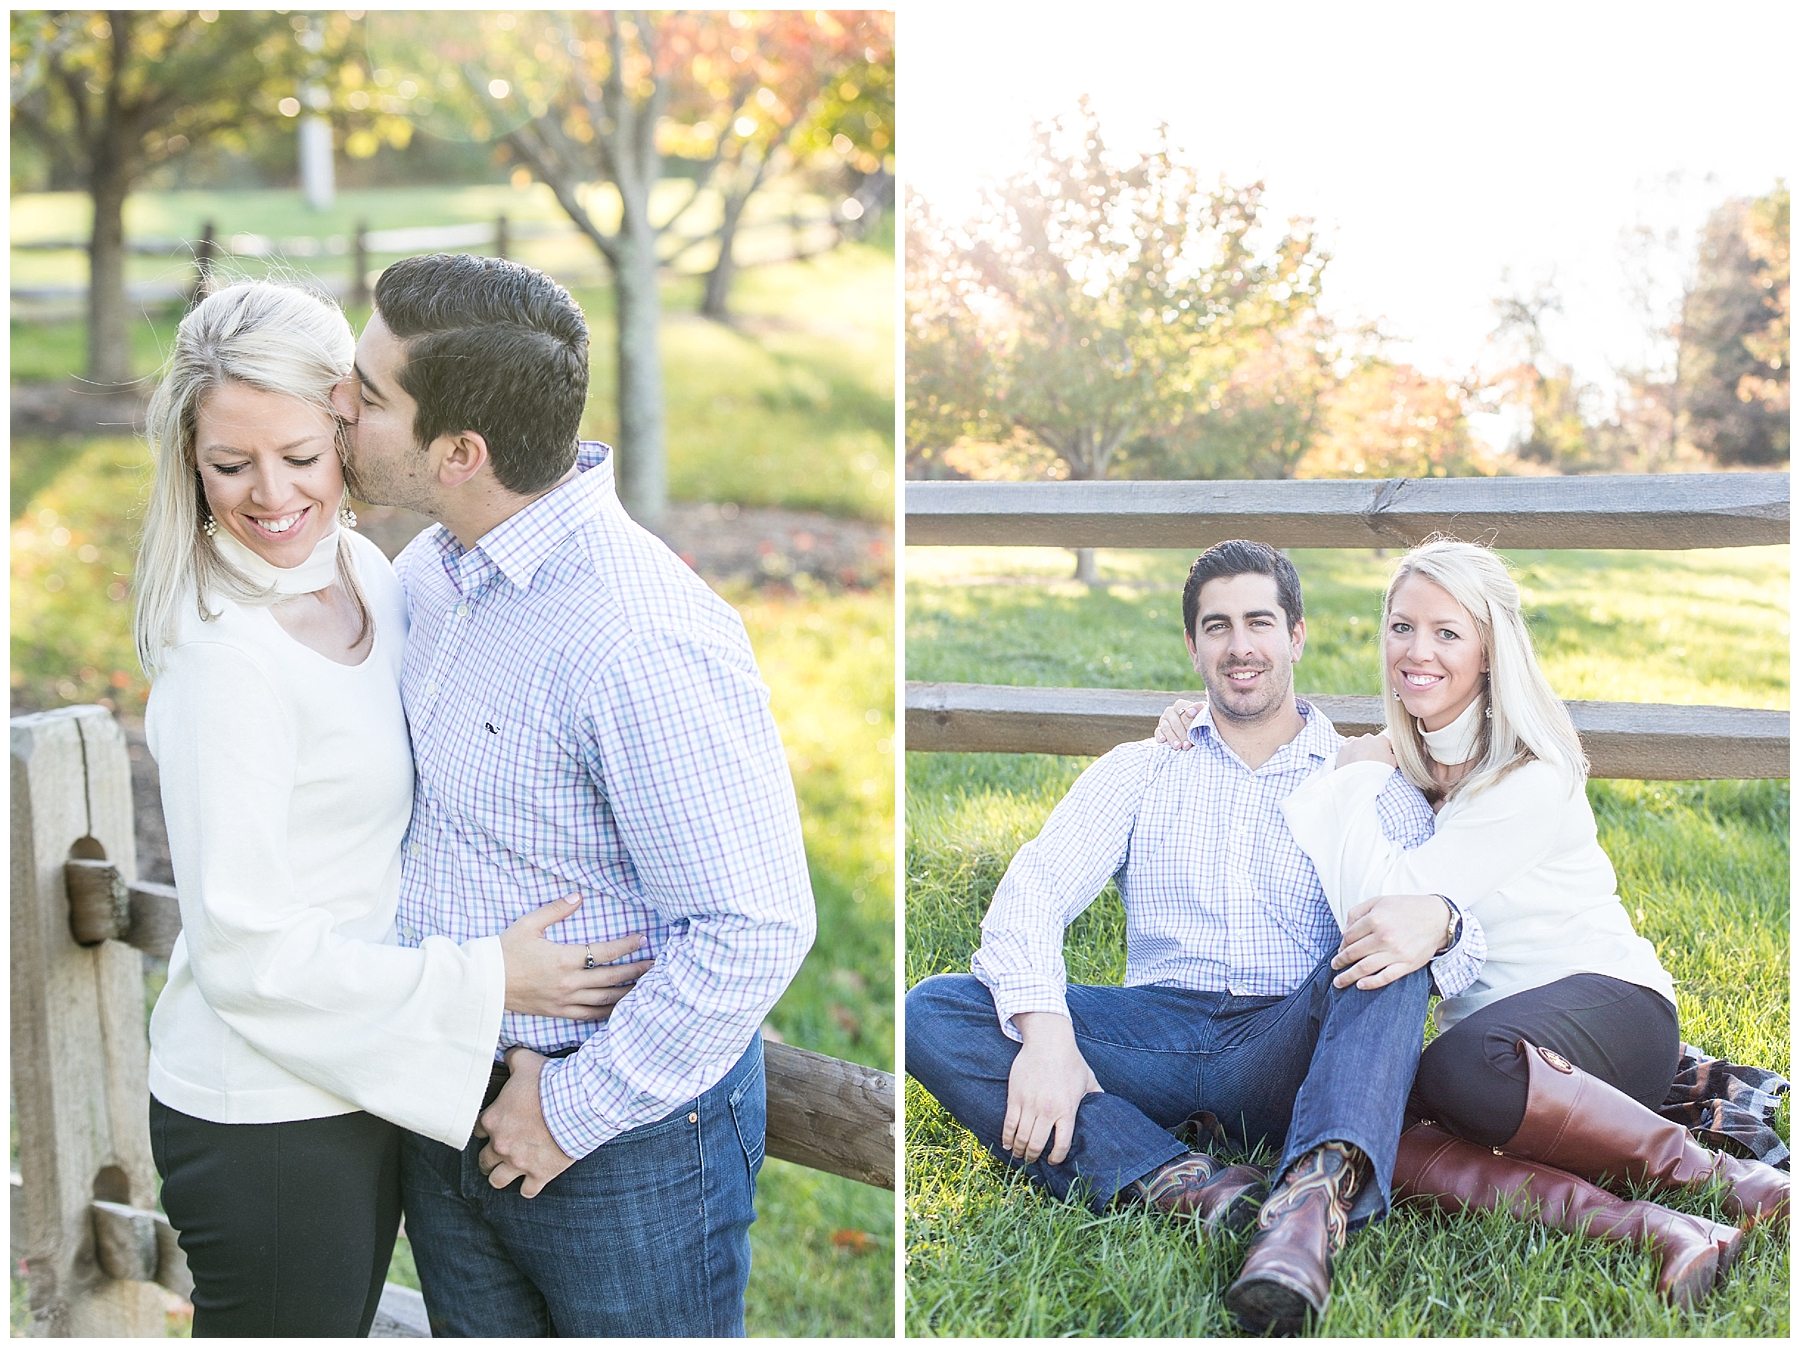 Nicole Mike Centennial Park Engagement Session Living Radiant Photography photos_0001.jpg